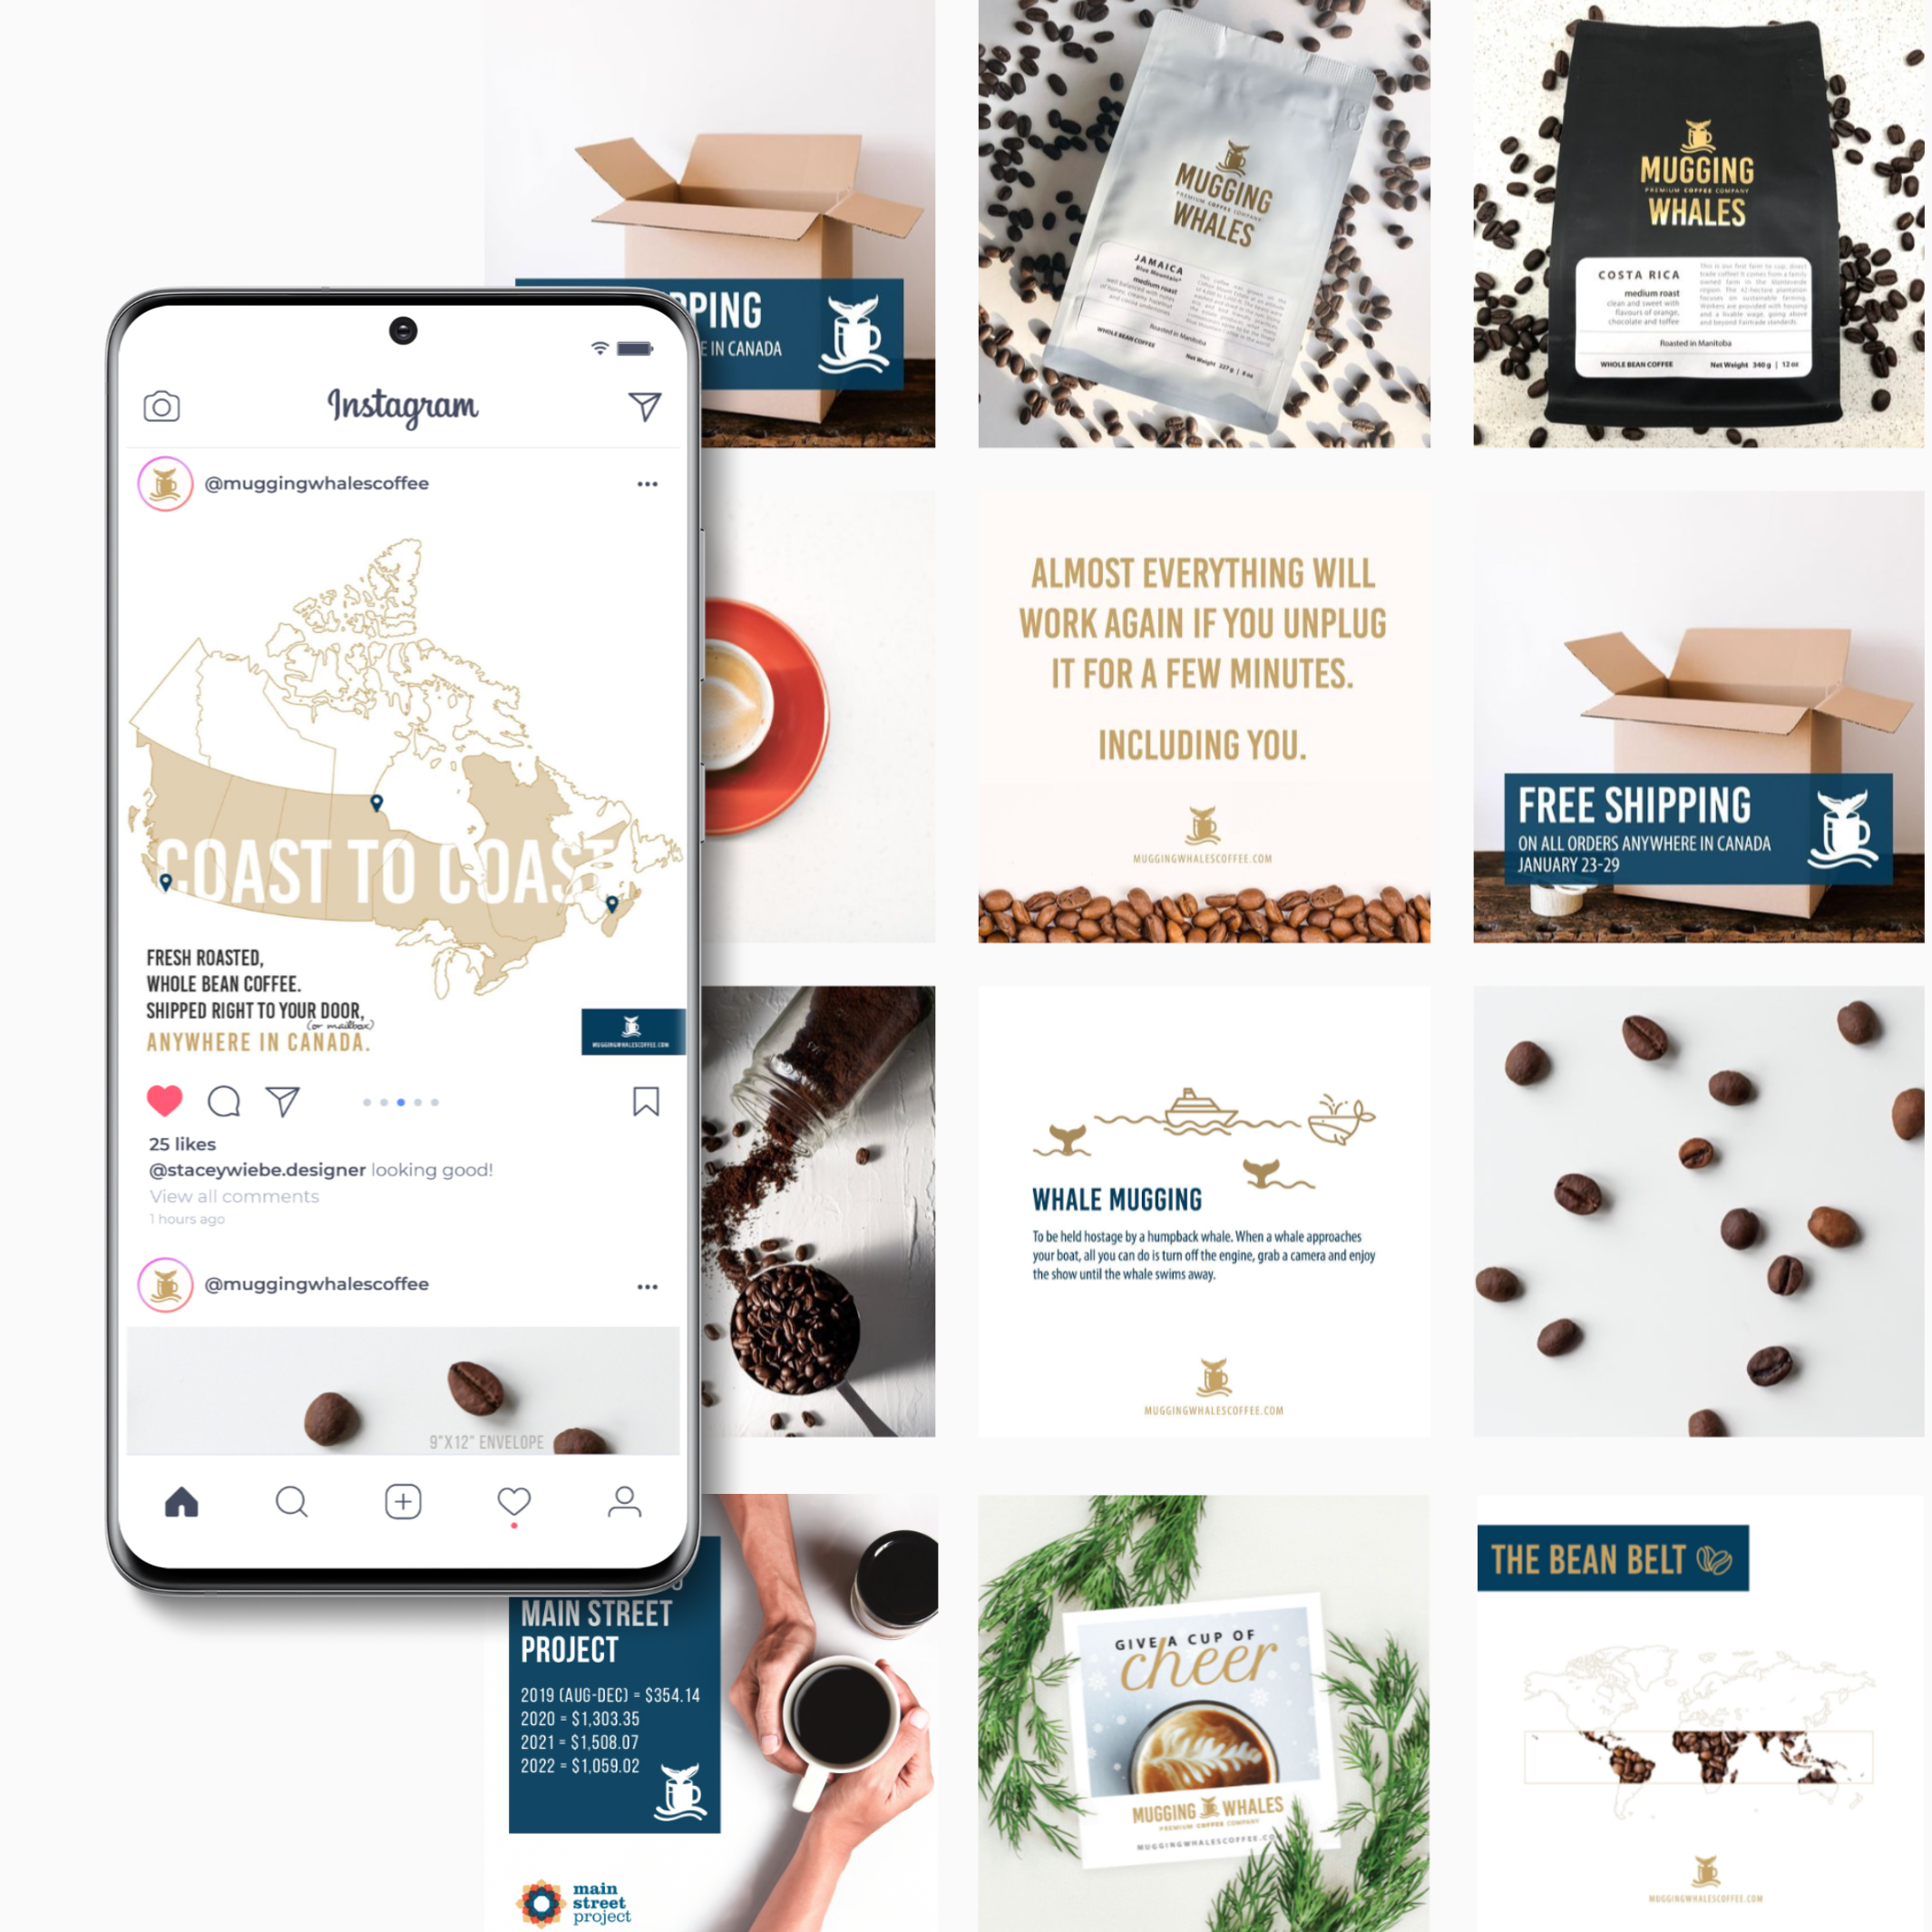 Mugging Whales Coffee curated social media feed